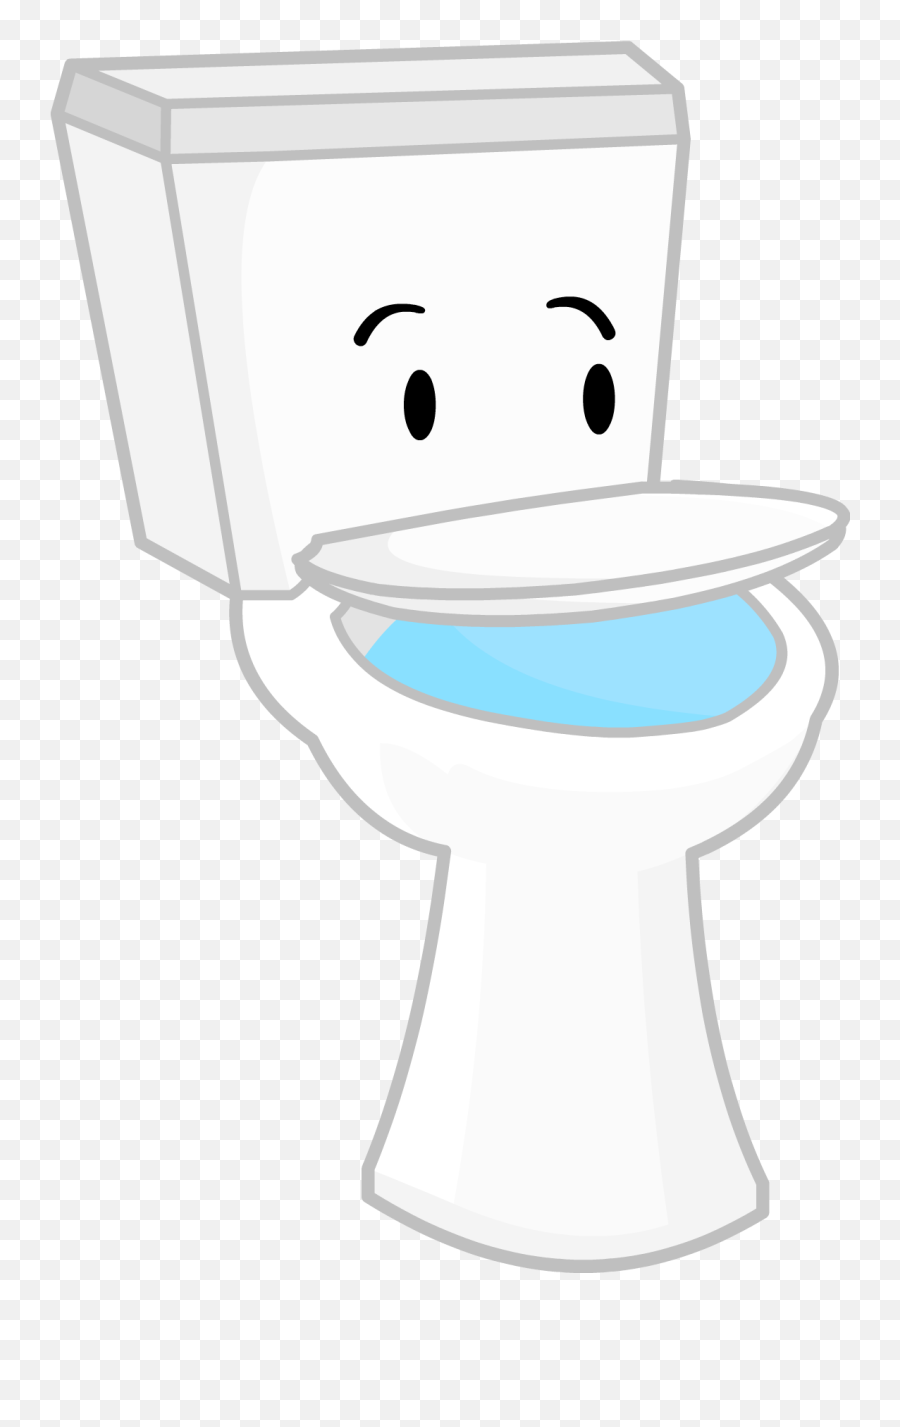 110 Bfdi Characters Ideas Battle For - Inanimate Insanity Toilet Png,Balloony Bfb Voting Icon